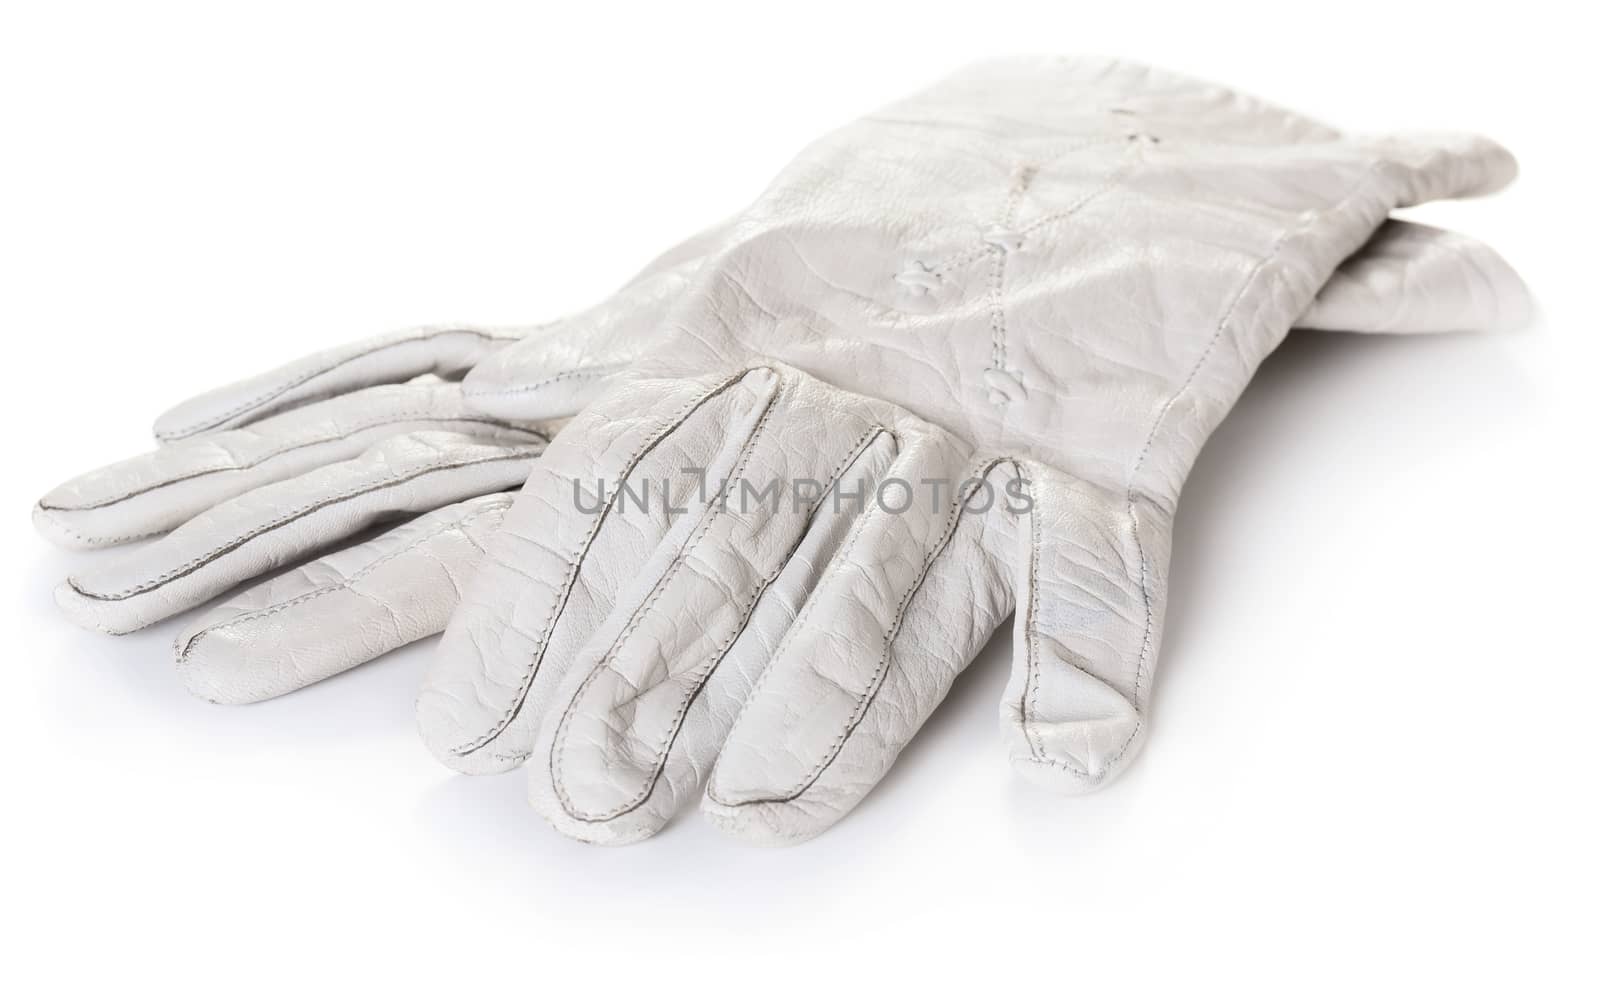 Ladies white leather gloves, isolated